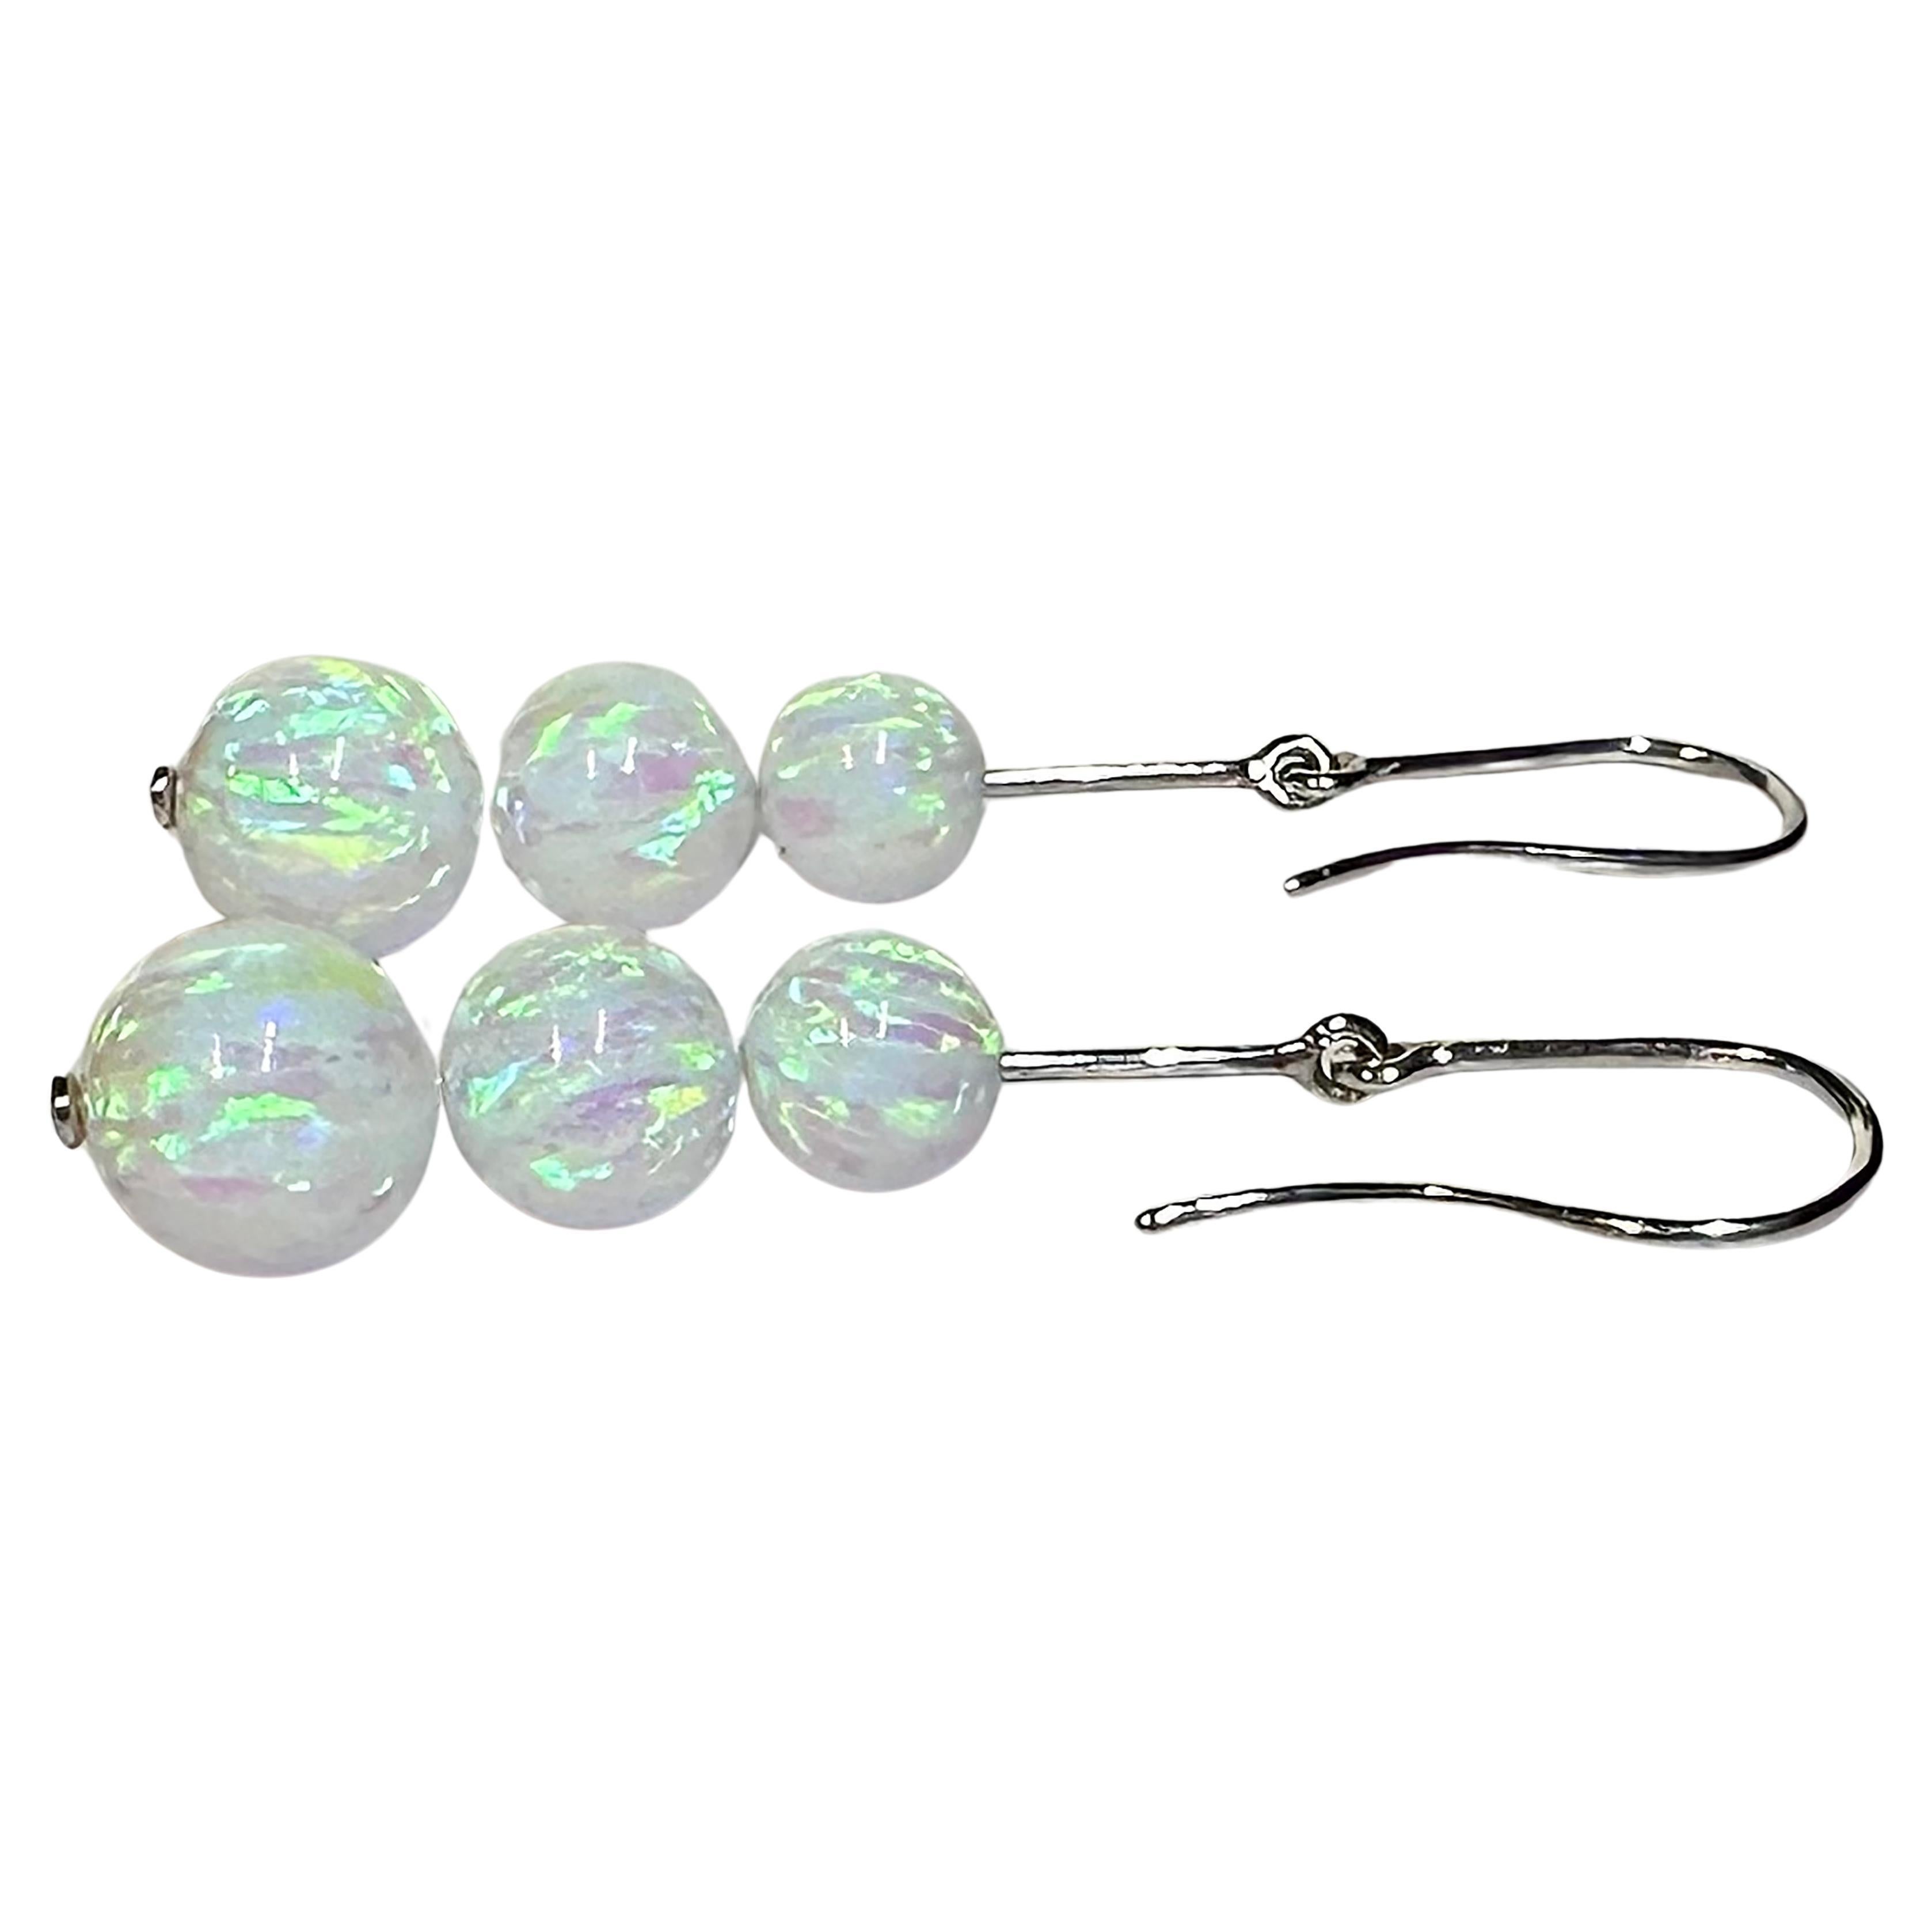 A stunning pair of 14kt White Gold Dangle Earrings set with graduated cultured Opal beads. These spectacular earrings are always in motion when worn and show blues, greens and turquoise colors as they scatter light.

Originally from San Diego,